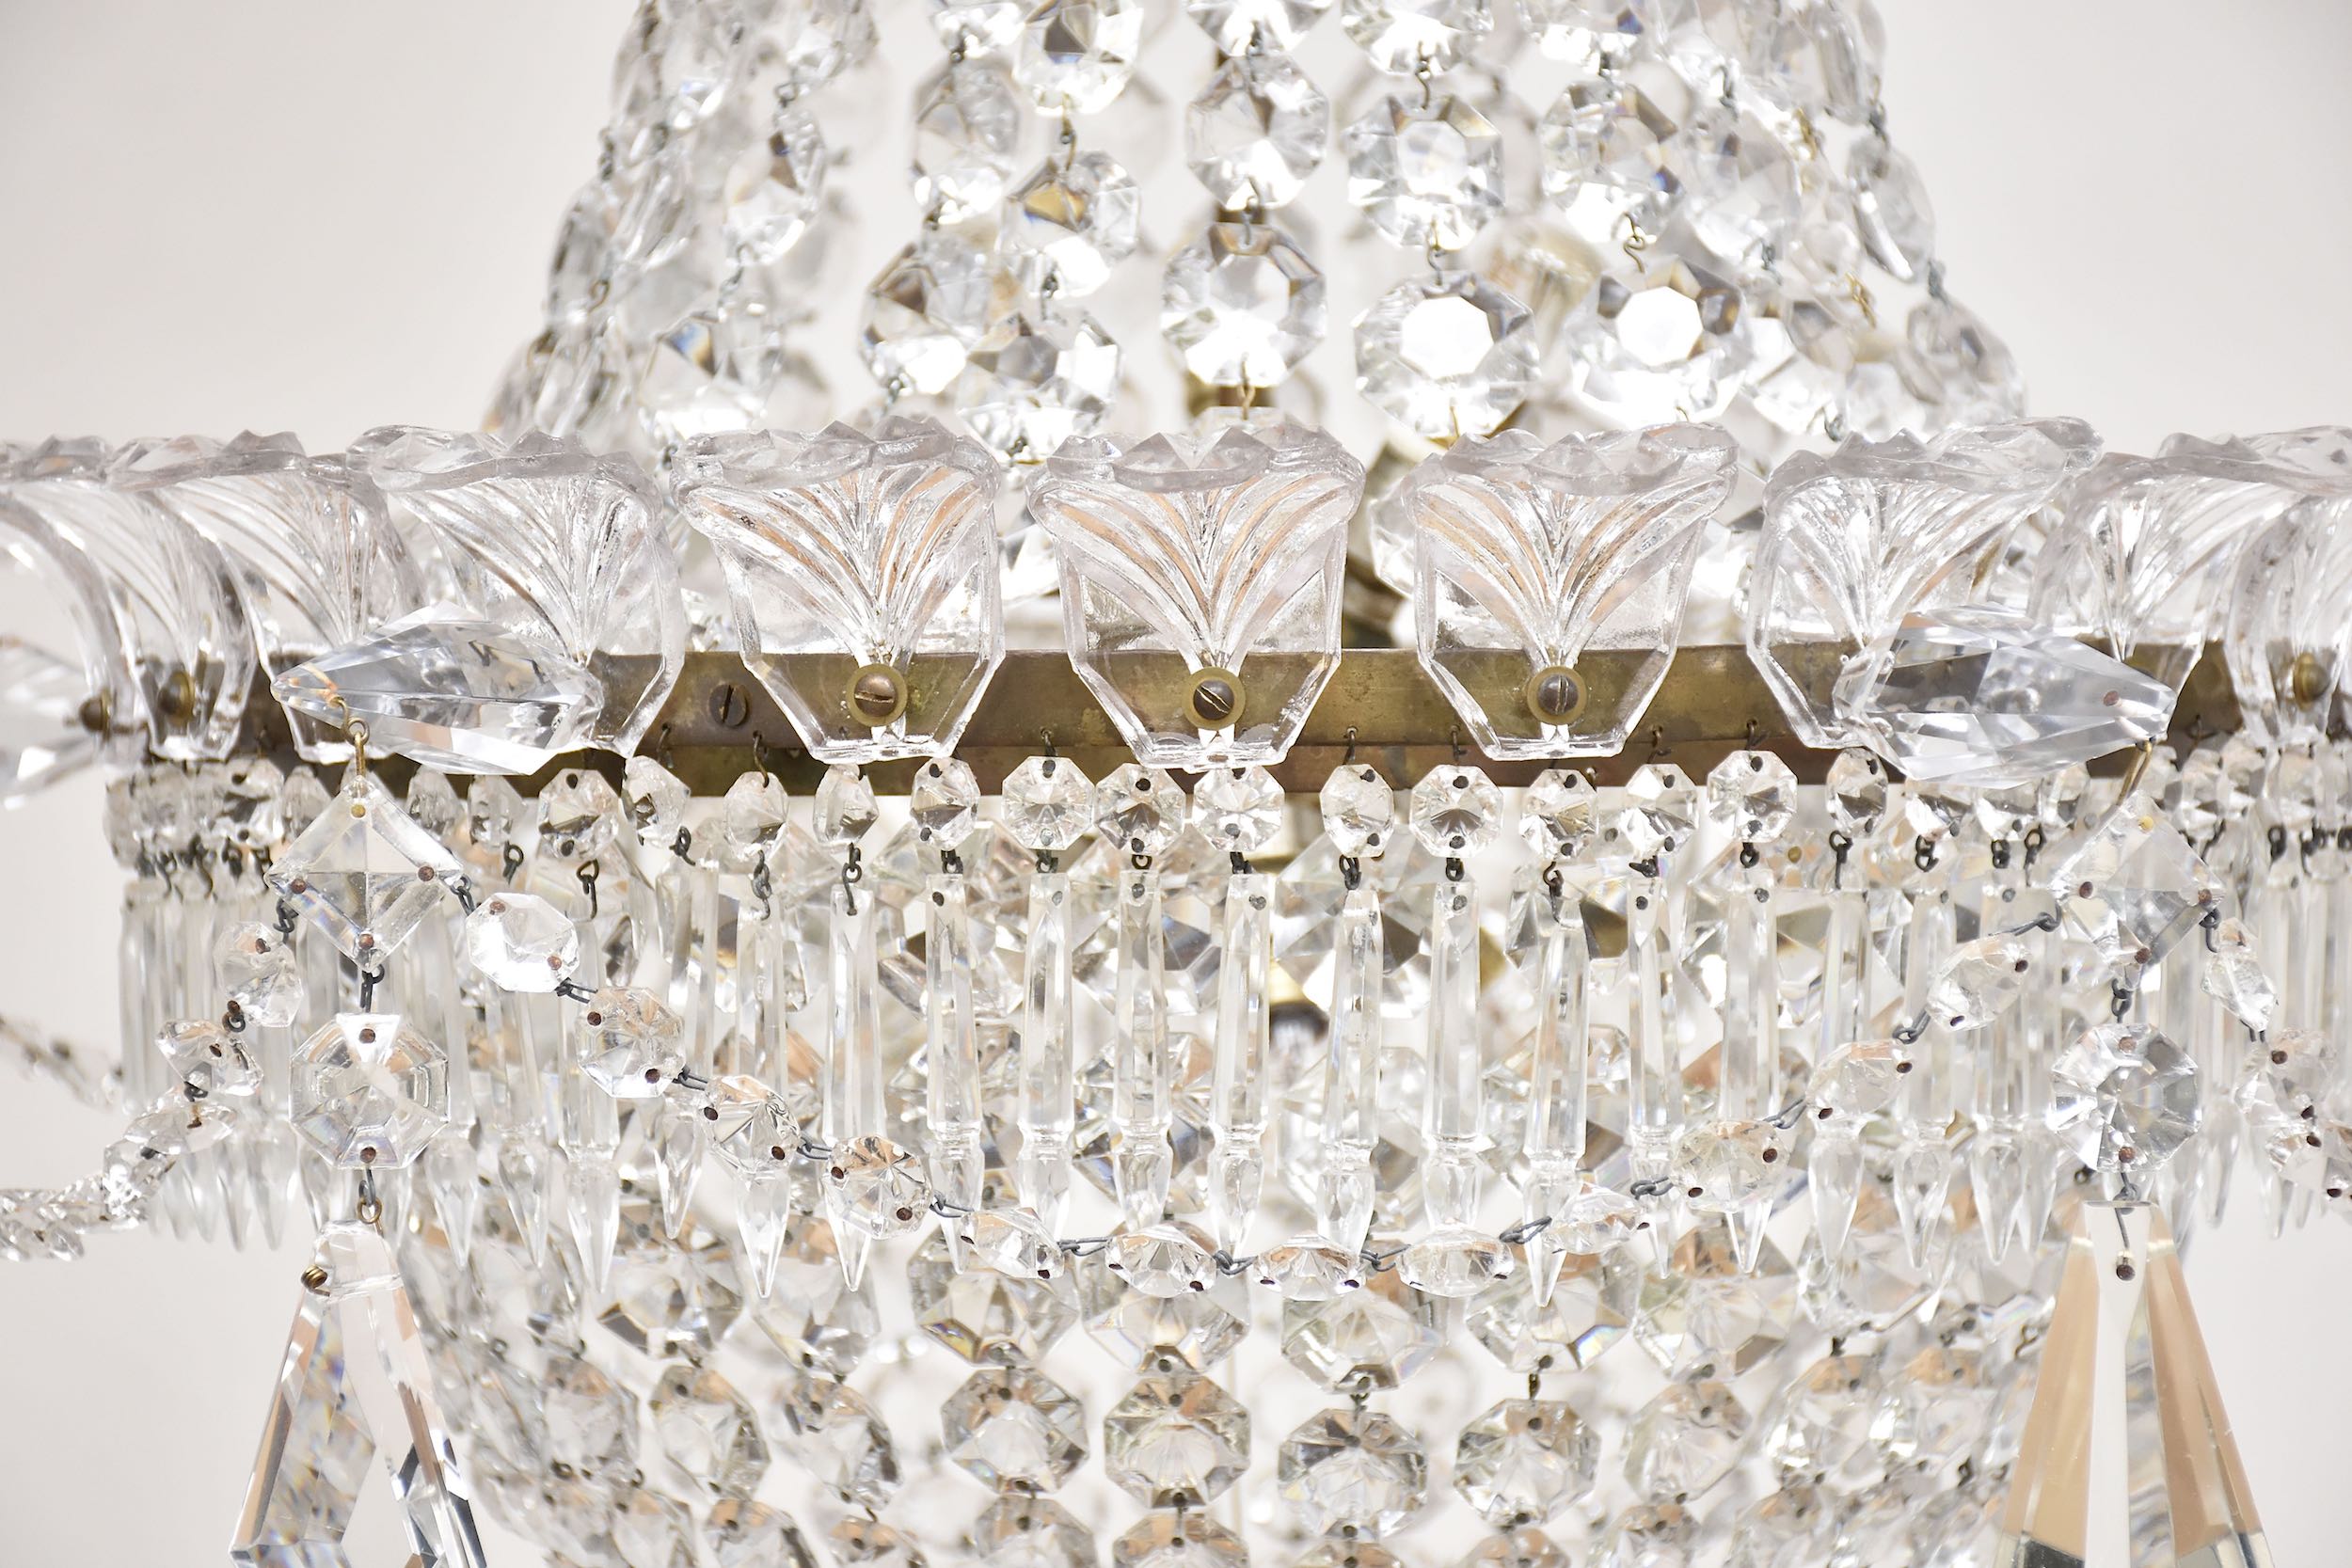 Crystal chandelier in the style of Louis XVI